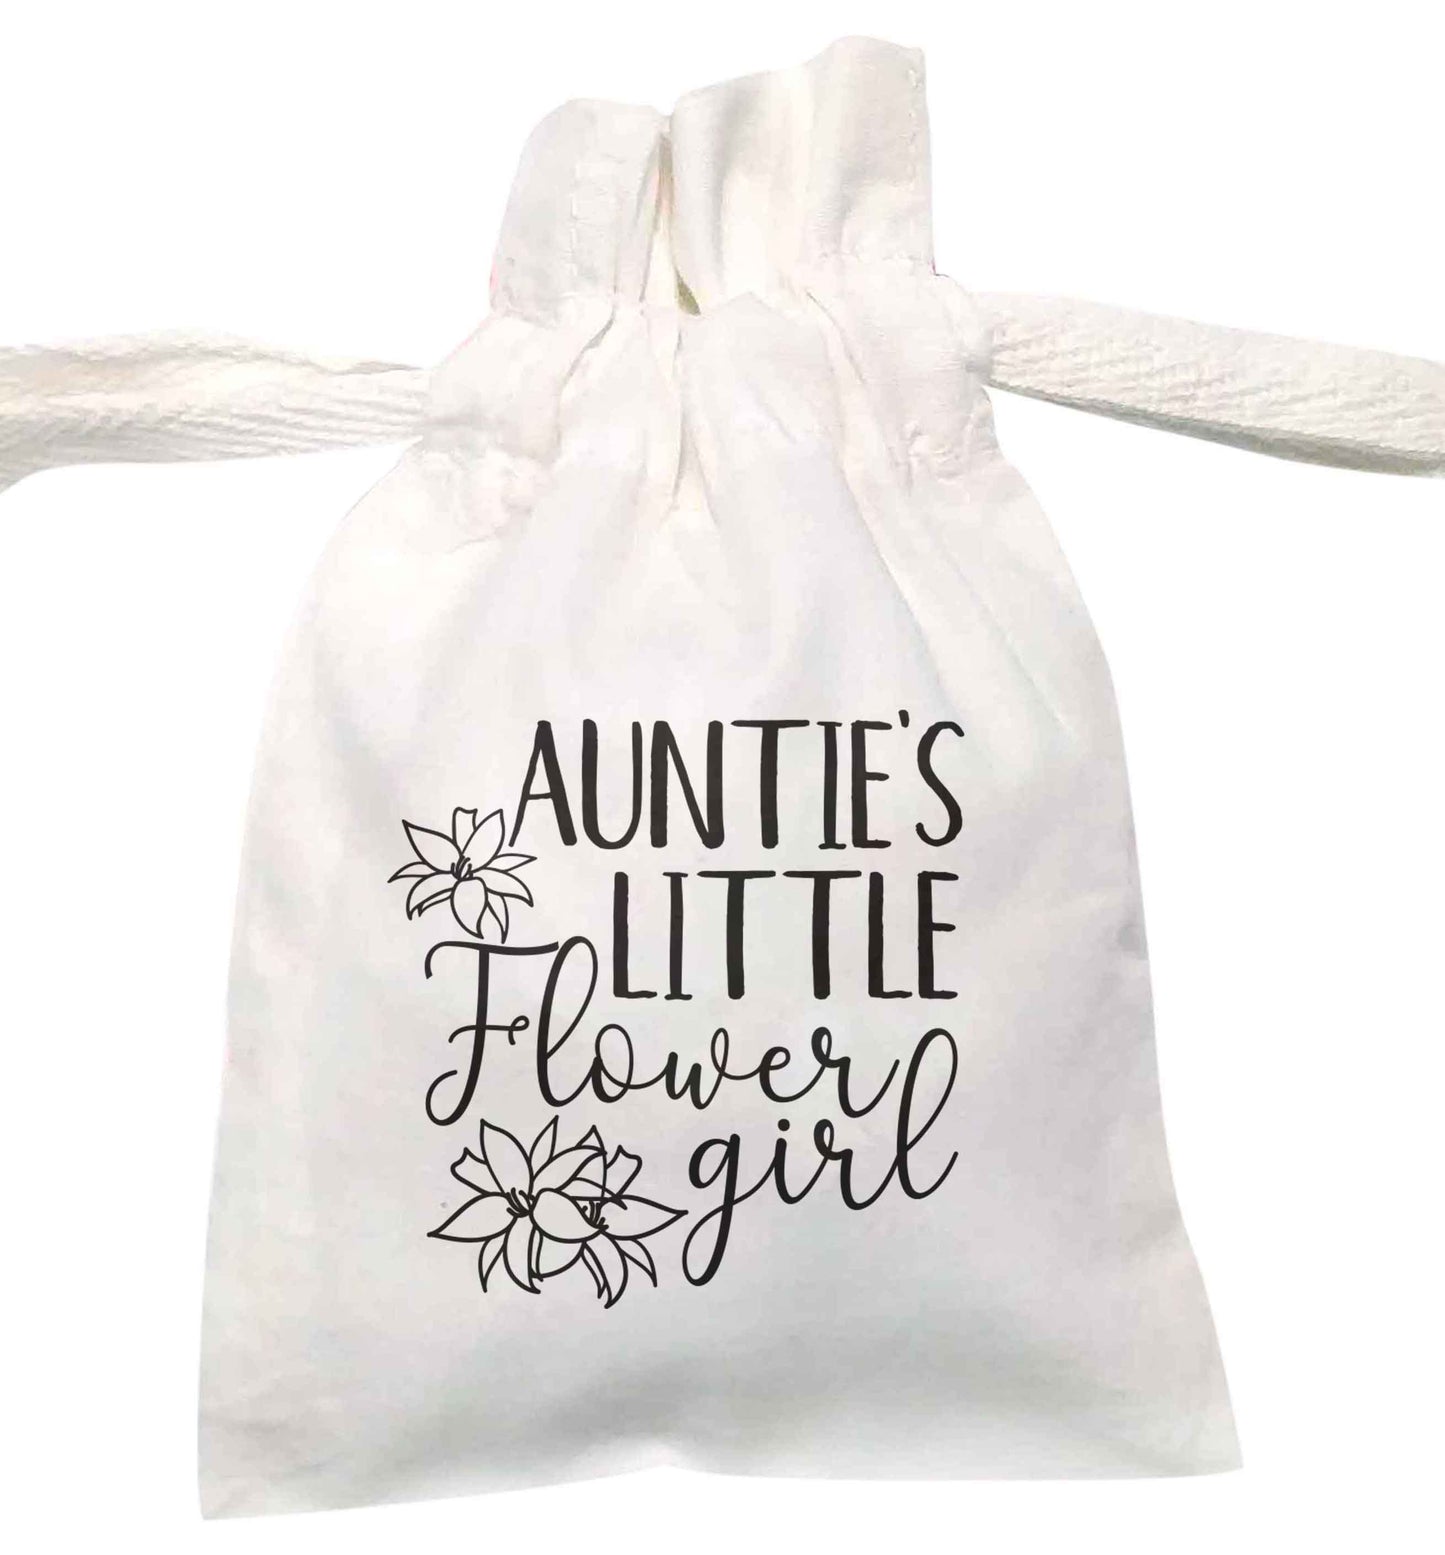 Aunties little flowergirl | XS - L | Pouch / Drawstring bag / Sack | Organic Cotton | Bulk discounts available!